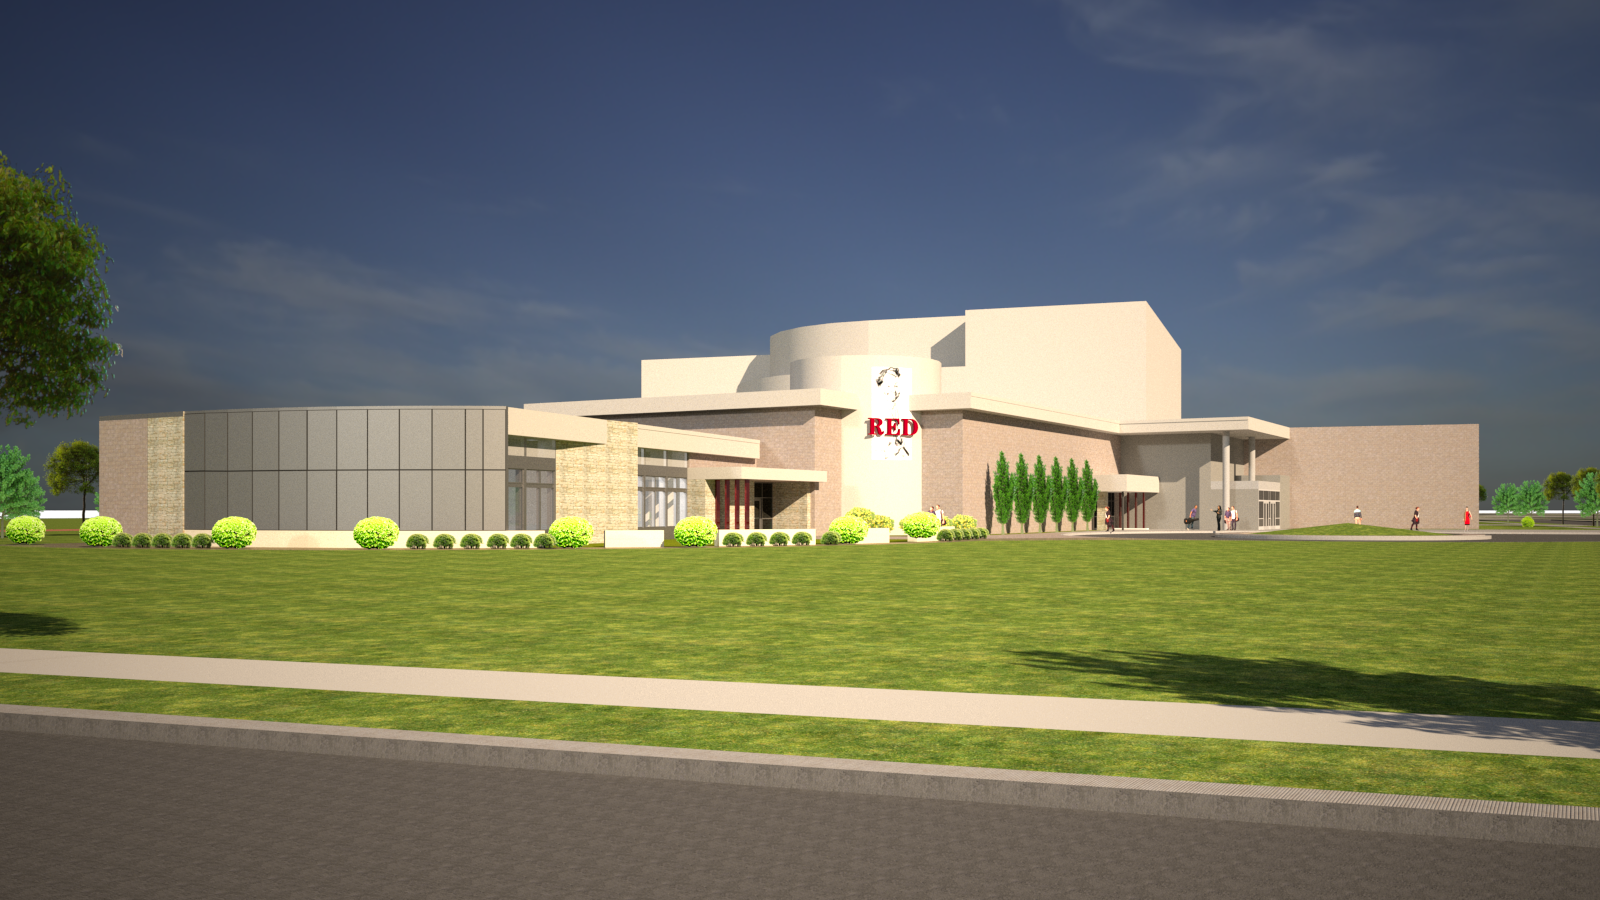 Red Skelton Museum expansion rendering featuring the Red Skelton Museum of American Comedy and Red Skelton Performing Arts Center with expansion next to museum.